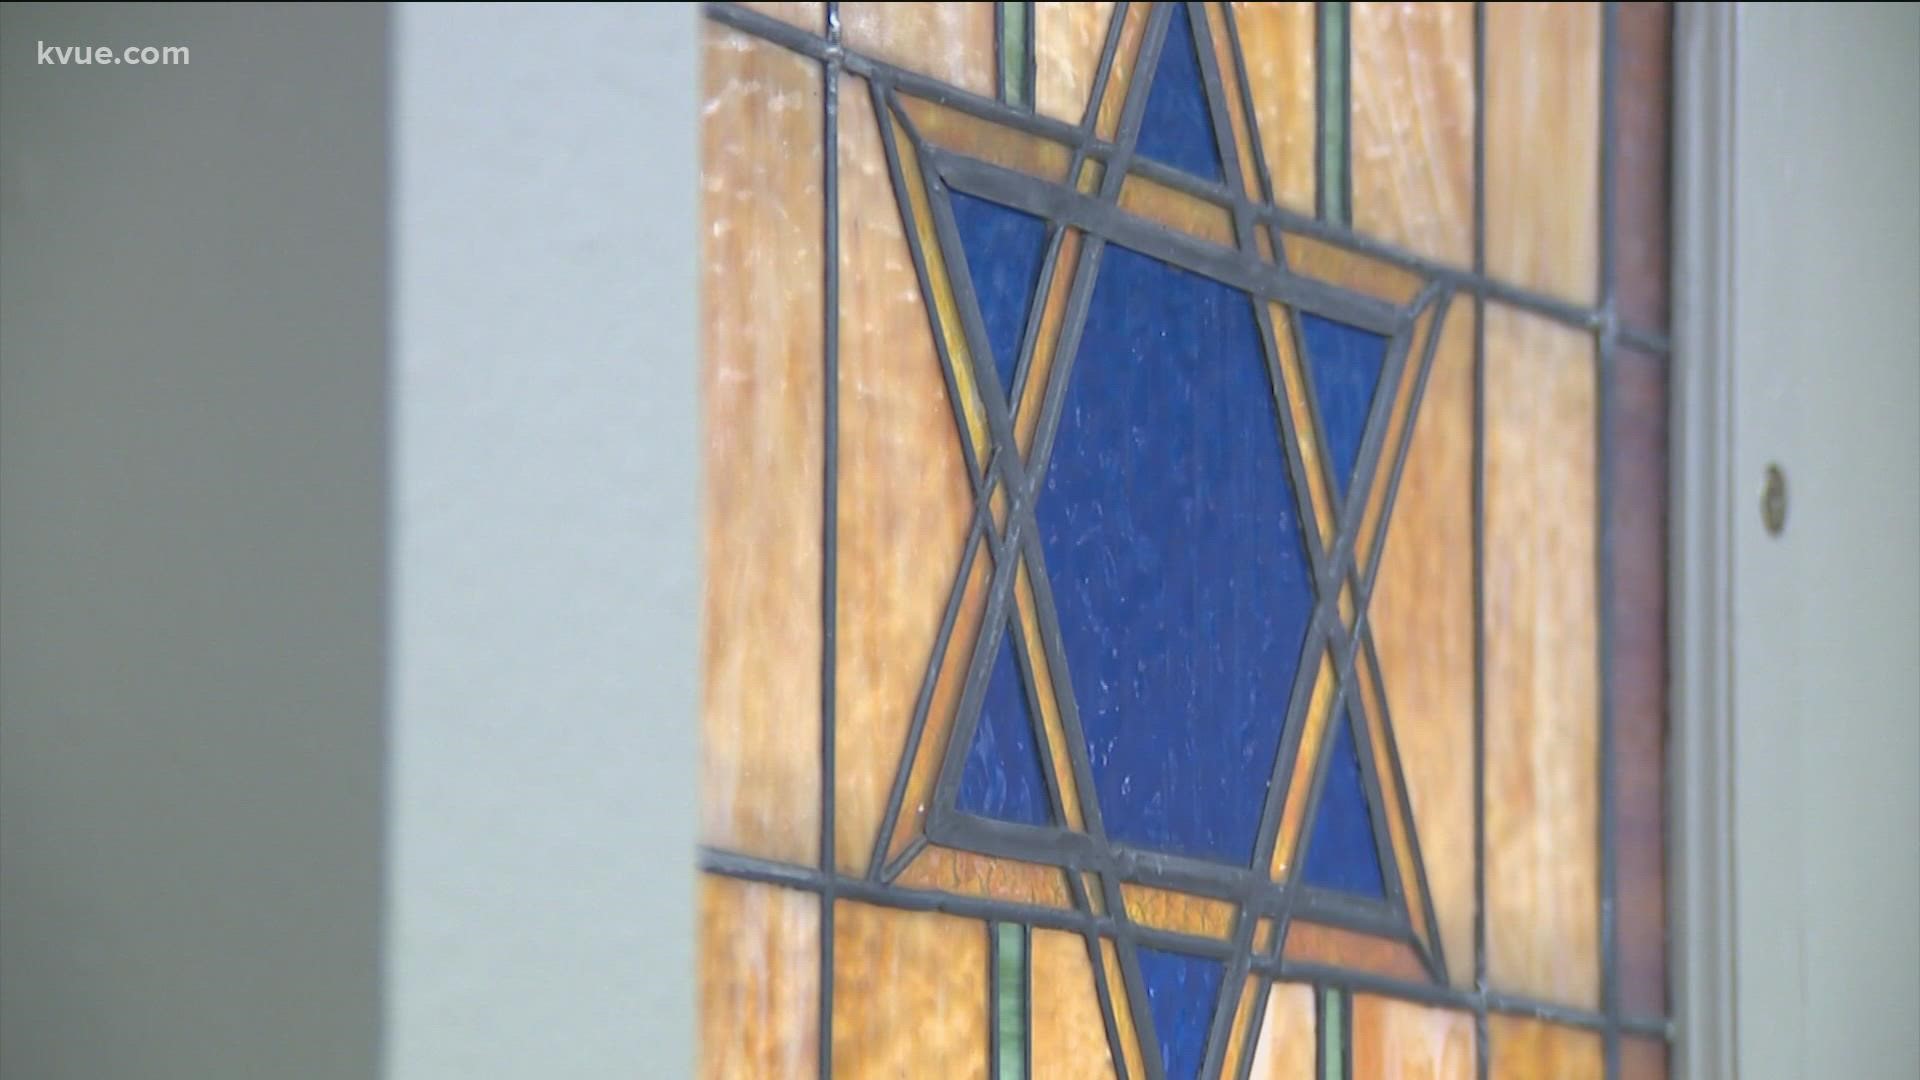 A new report by the Anti-Defamation League shows there were 44 anti-Semitic incidents in Austin 2021. That is compared to just 8 in 2020.